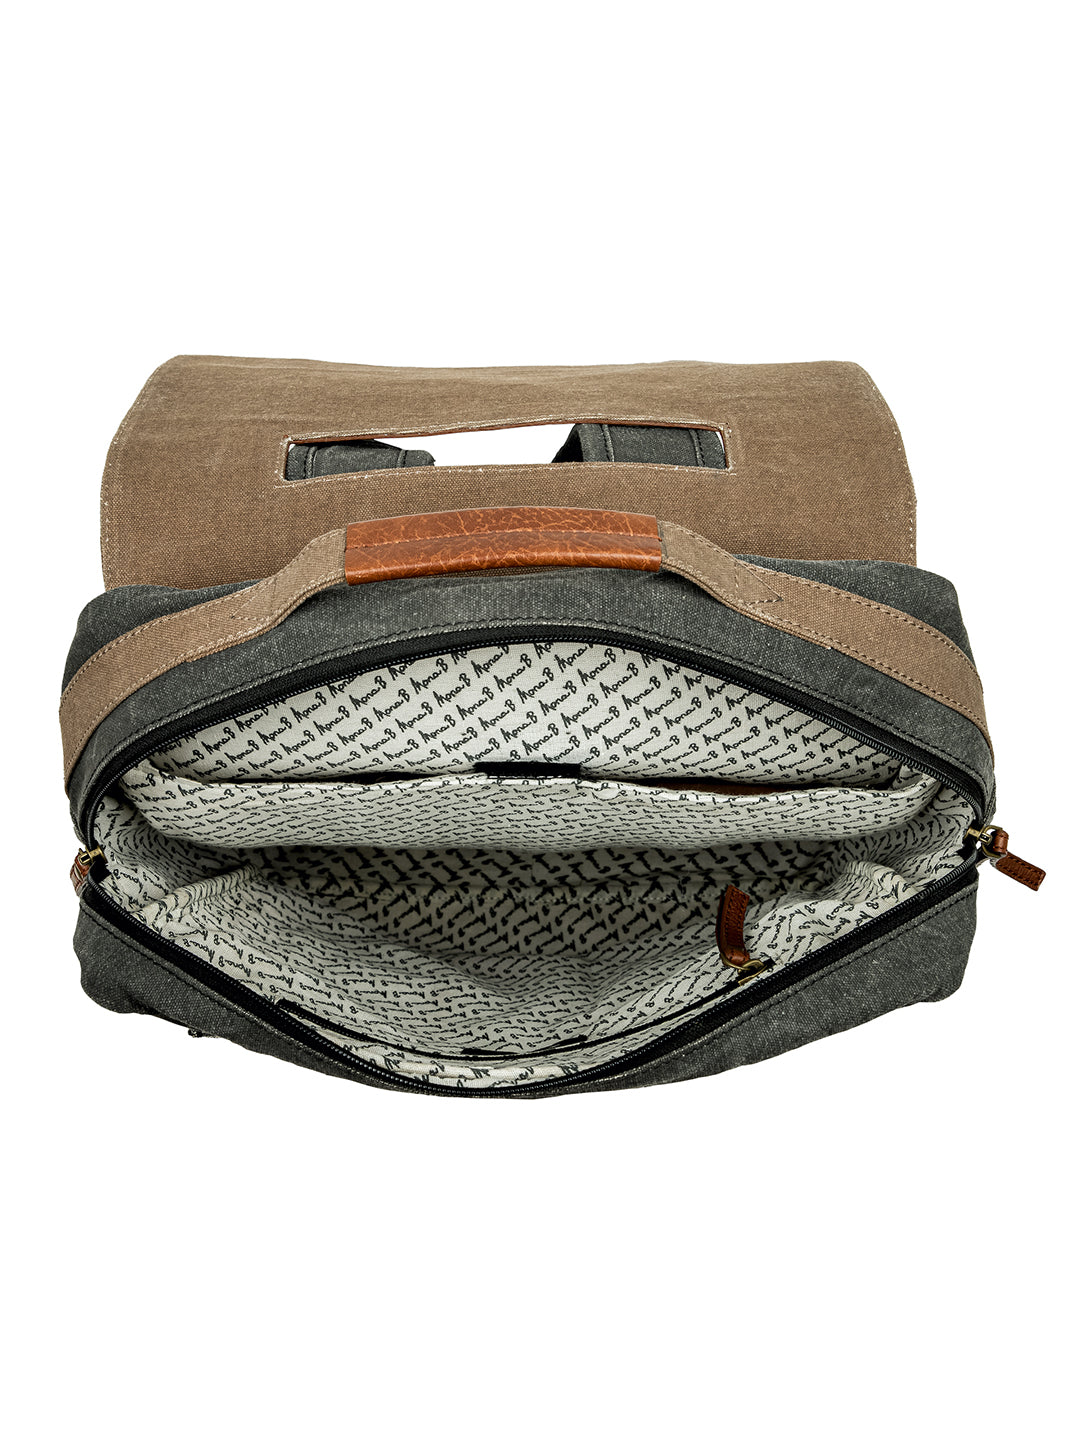 Mona B upcycled canvas back pack for office | school and college with upto 14” laptop/ Mac Book/ tablet: Flap